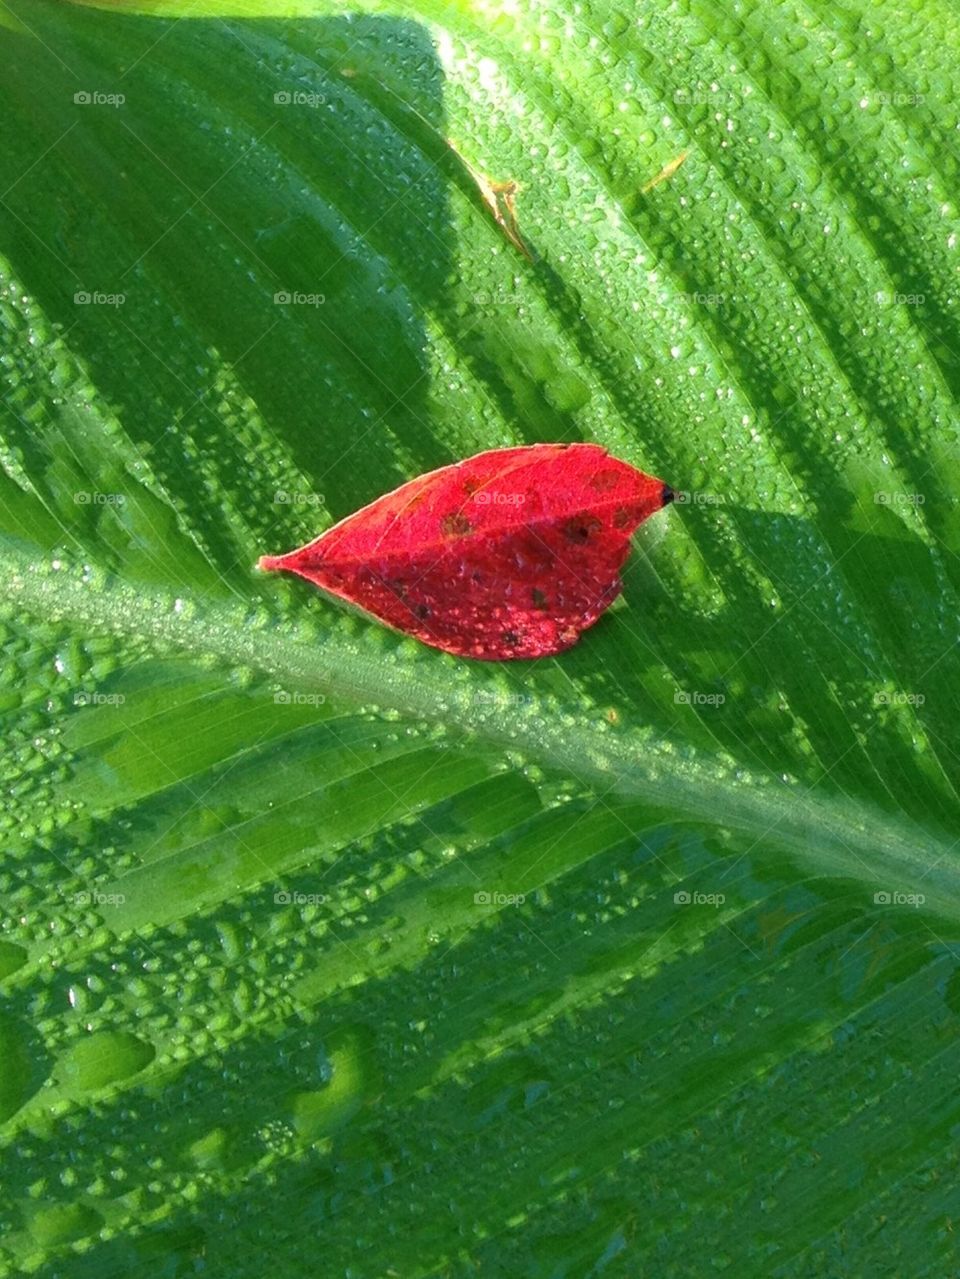 Red leaf on Canna leaf. It was a morning after a rain and I loved the contrast of colors